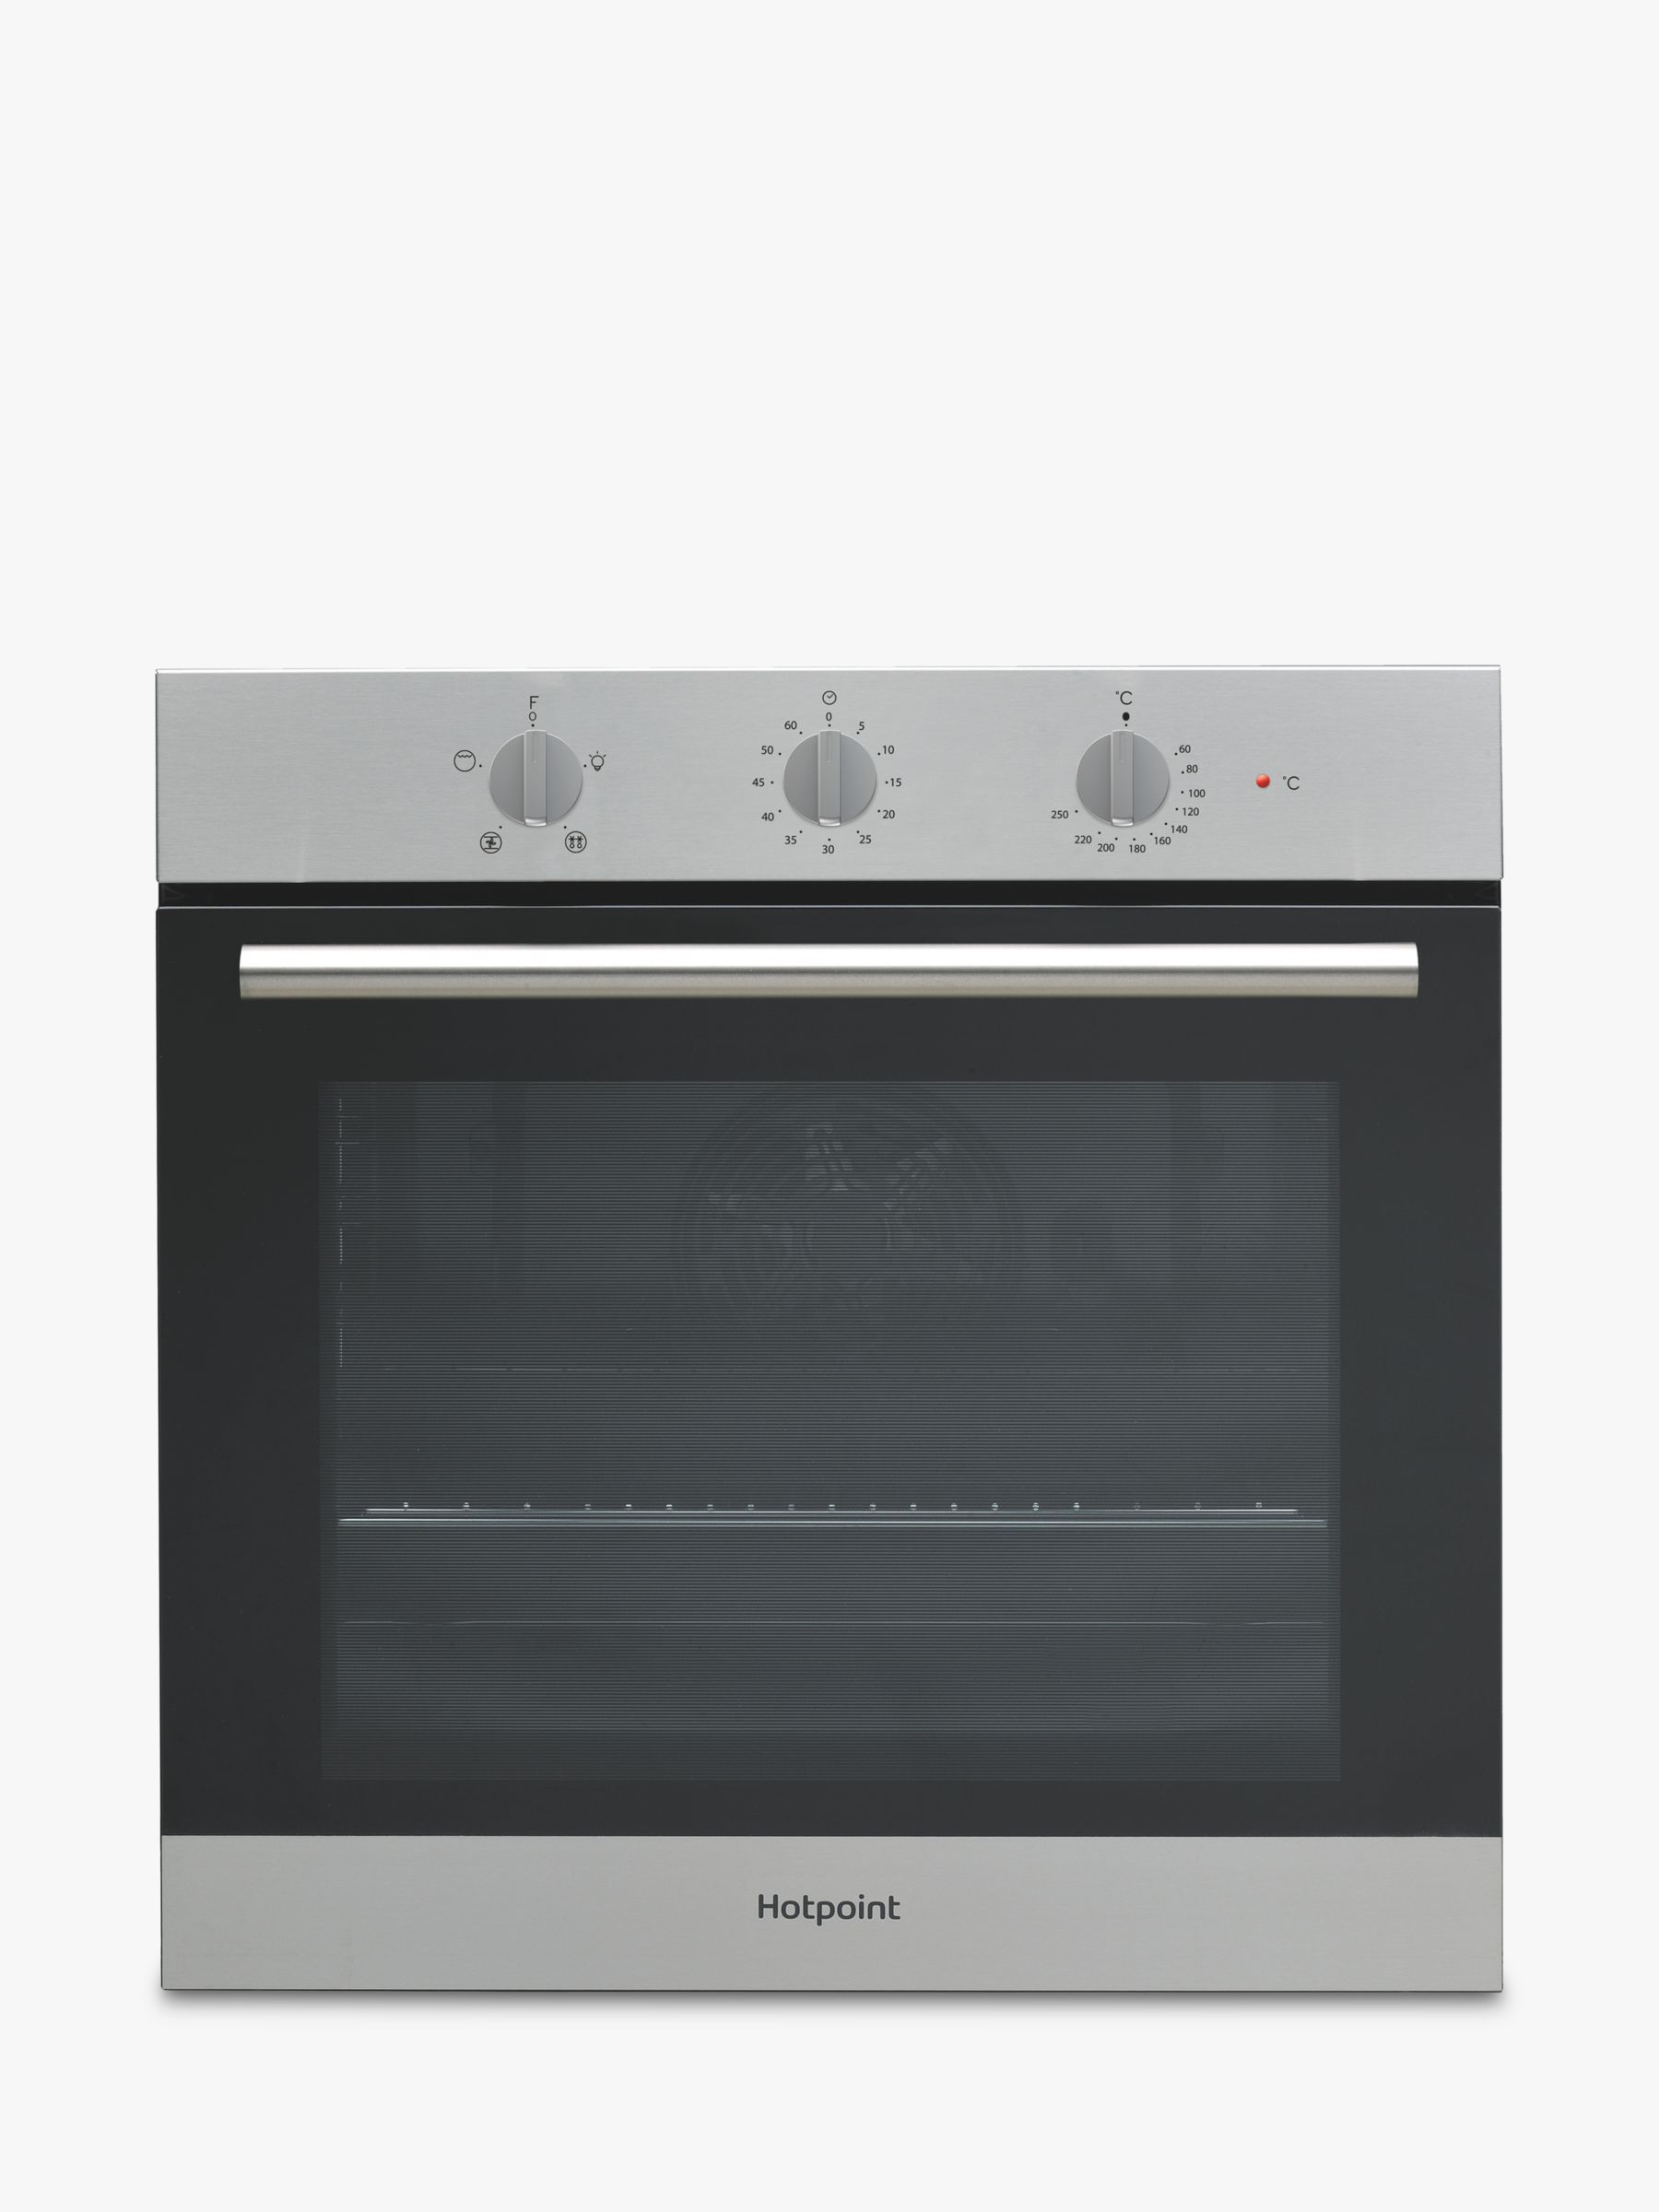 Hotpoint SA3330H Class 3 Built-In Electric Single Oven, Stainless Steel